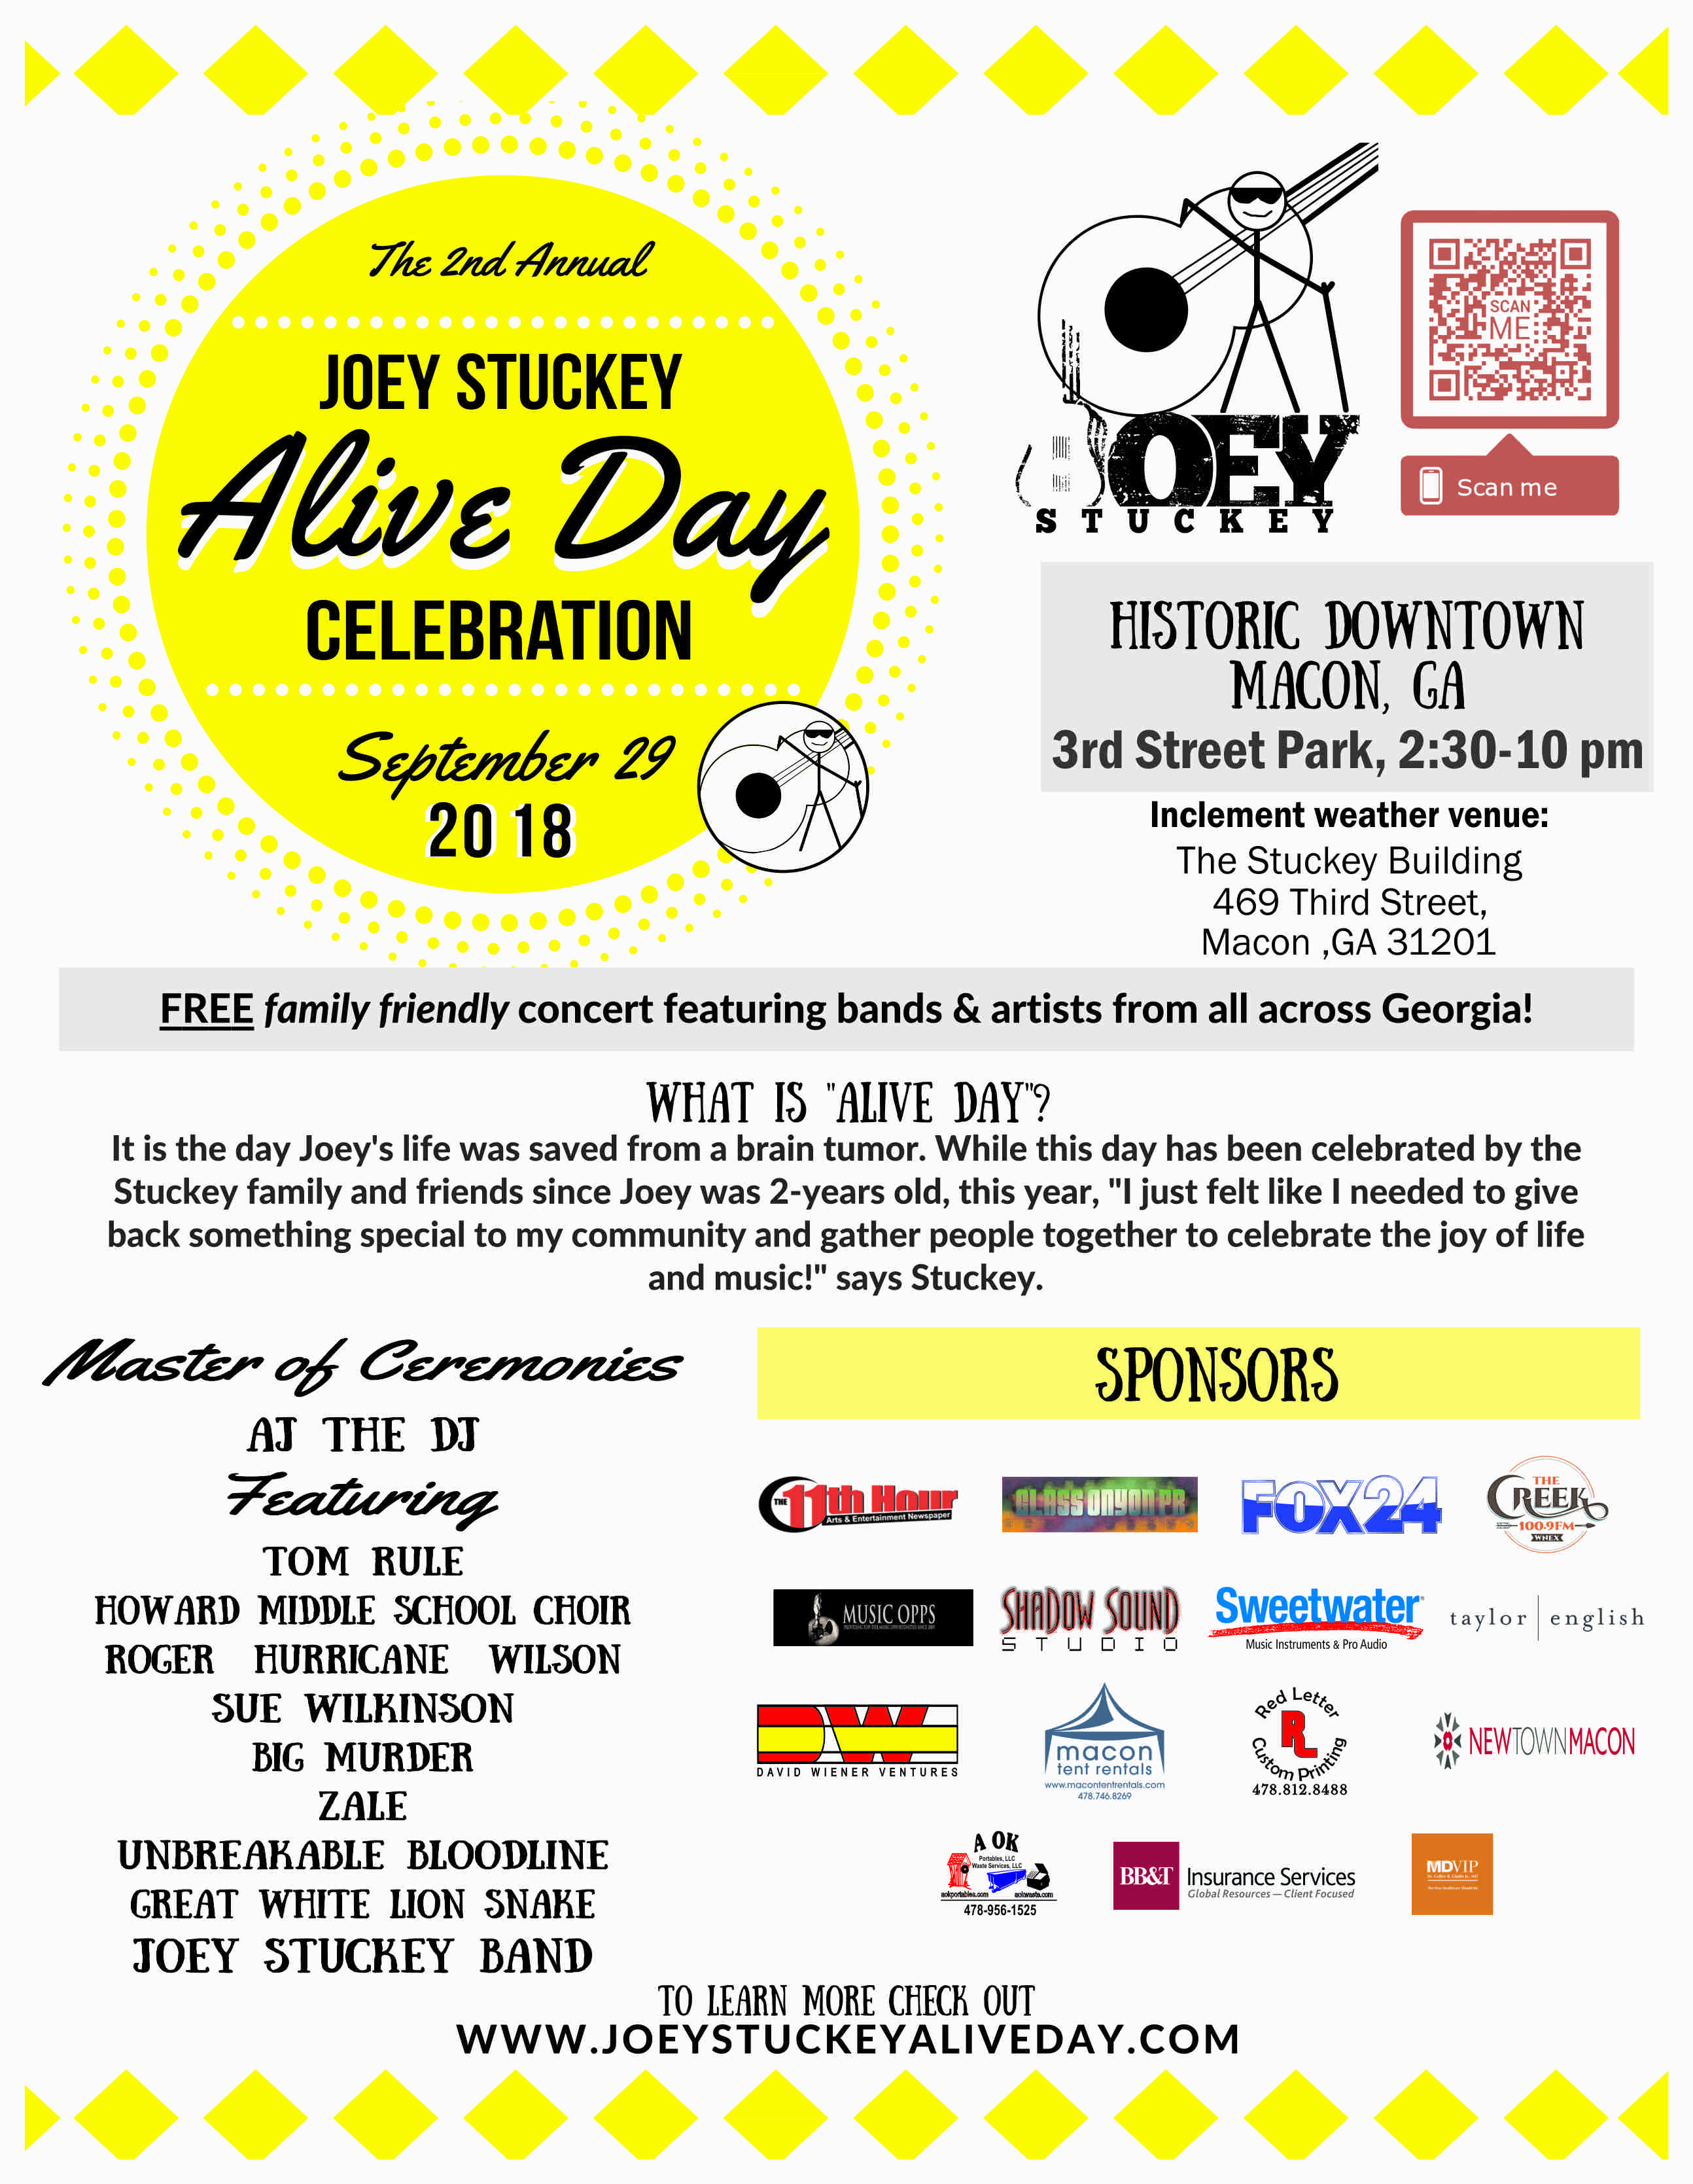 Joey Stuckey's Alive Day 2018 Poster